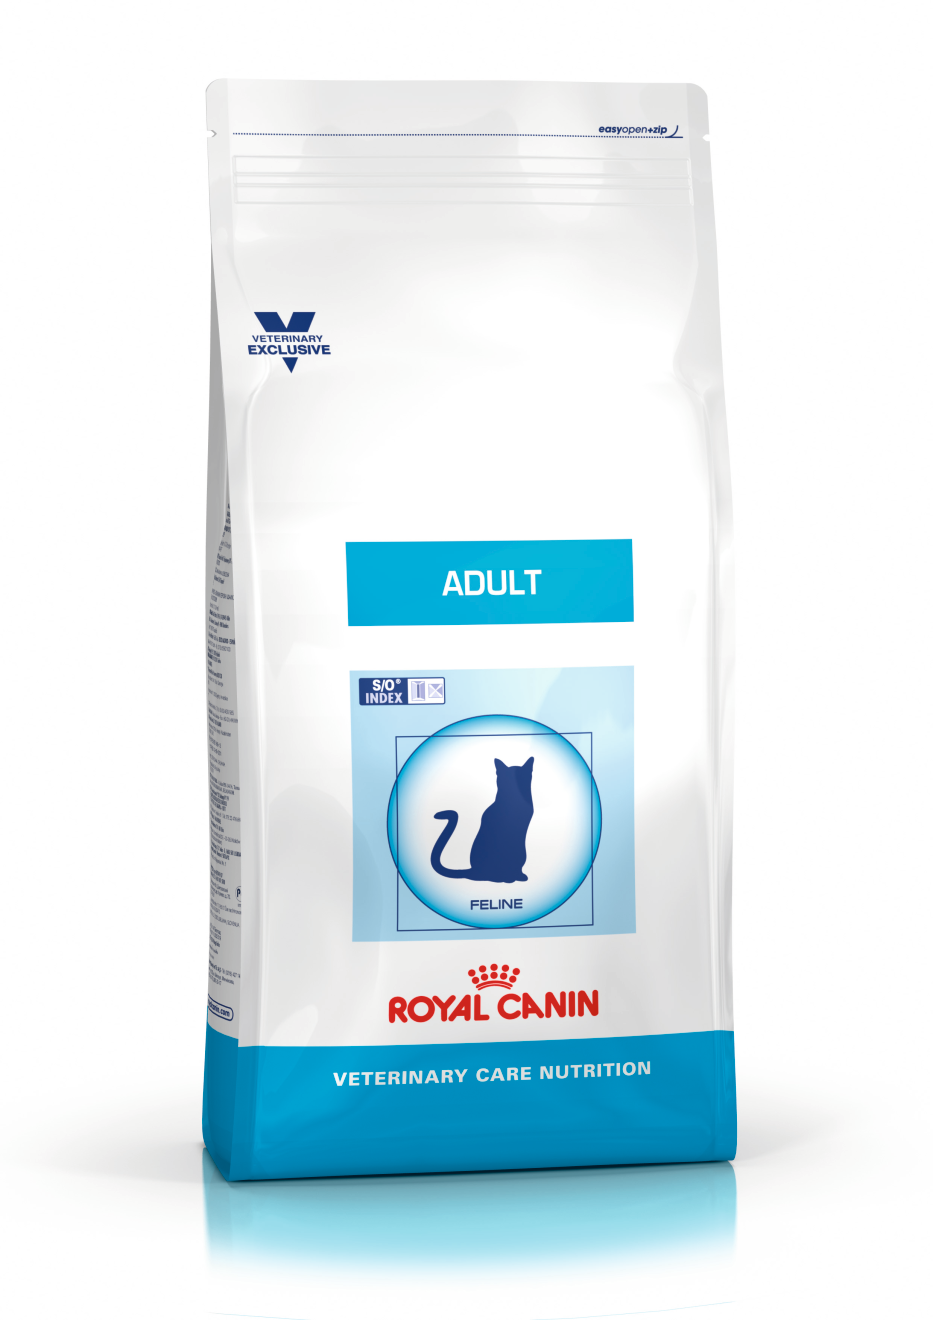 Cat Vet Products - Royal Canin